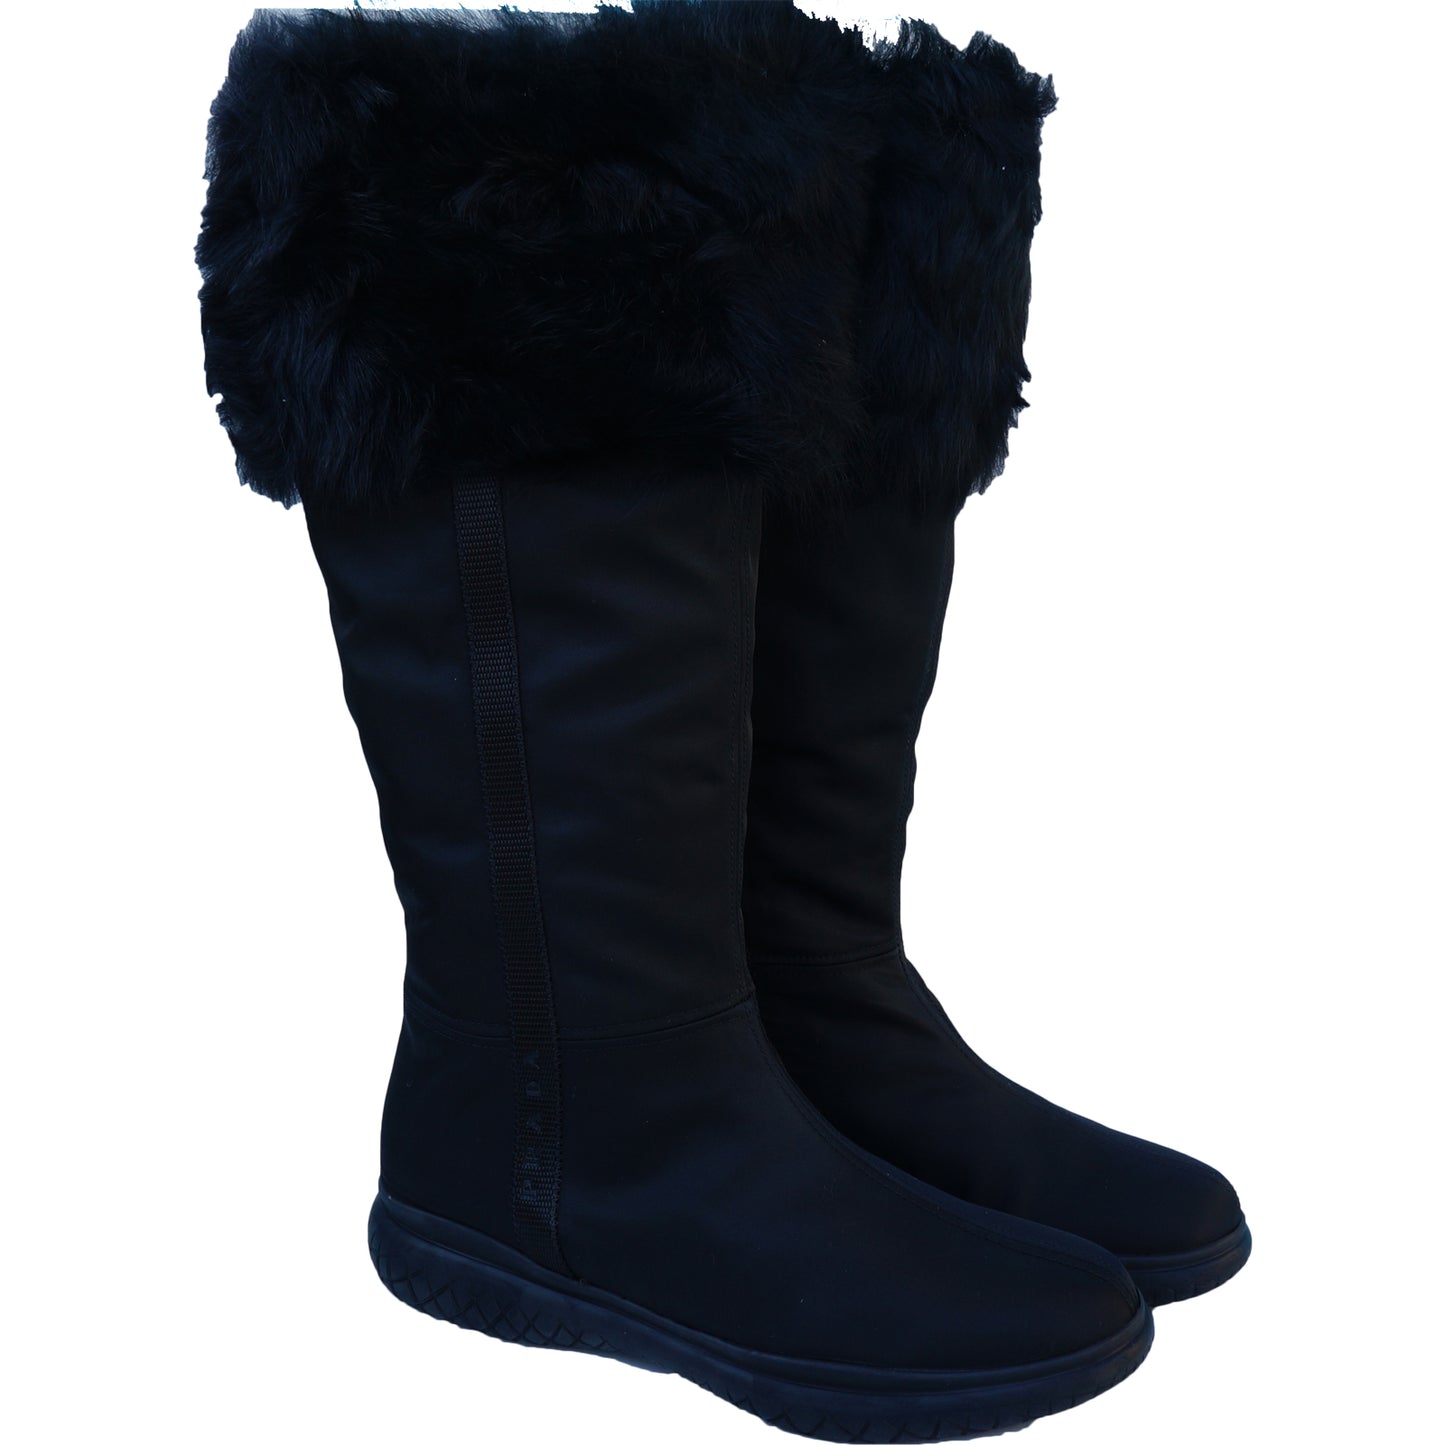 PRADA SHEARLING NYLON & RUBBER BOOTS NEW WITH TAGS - leefluxury.com